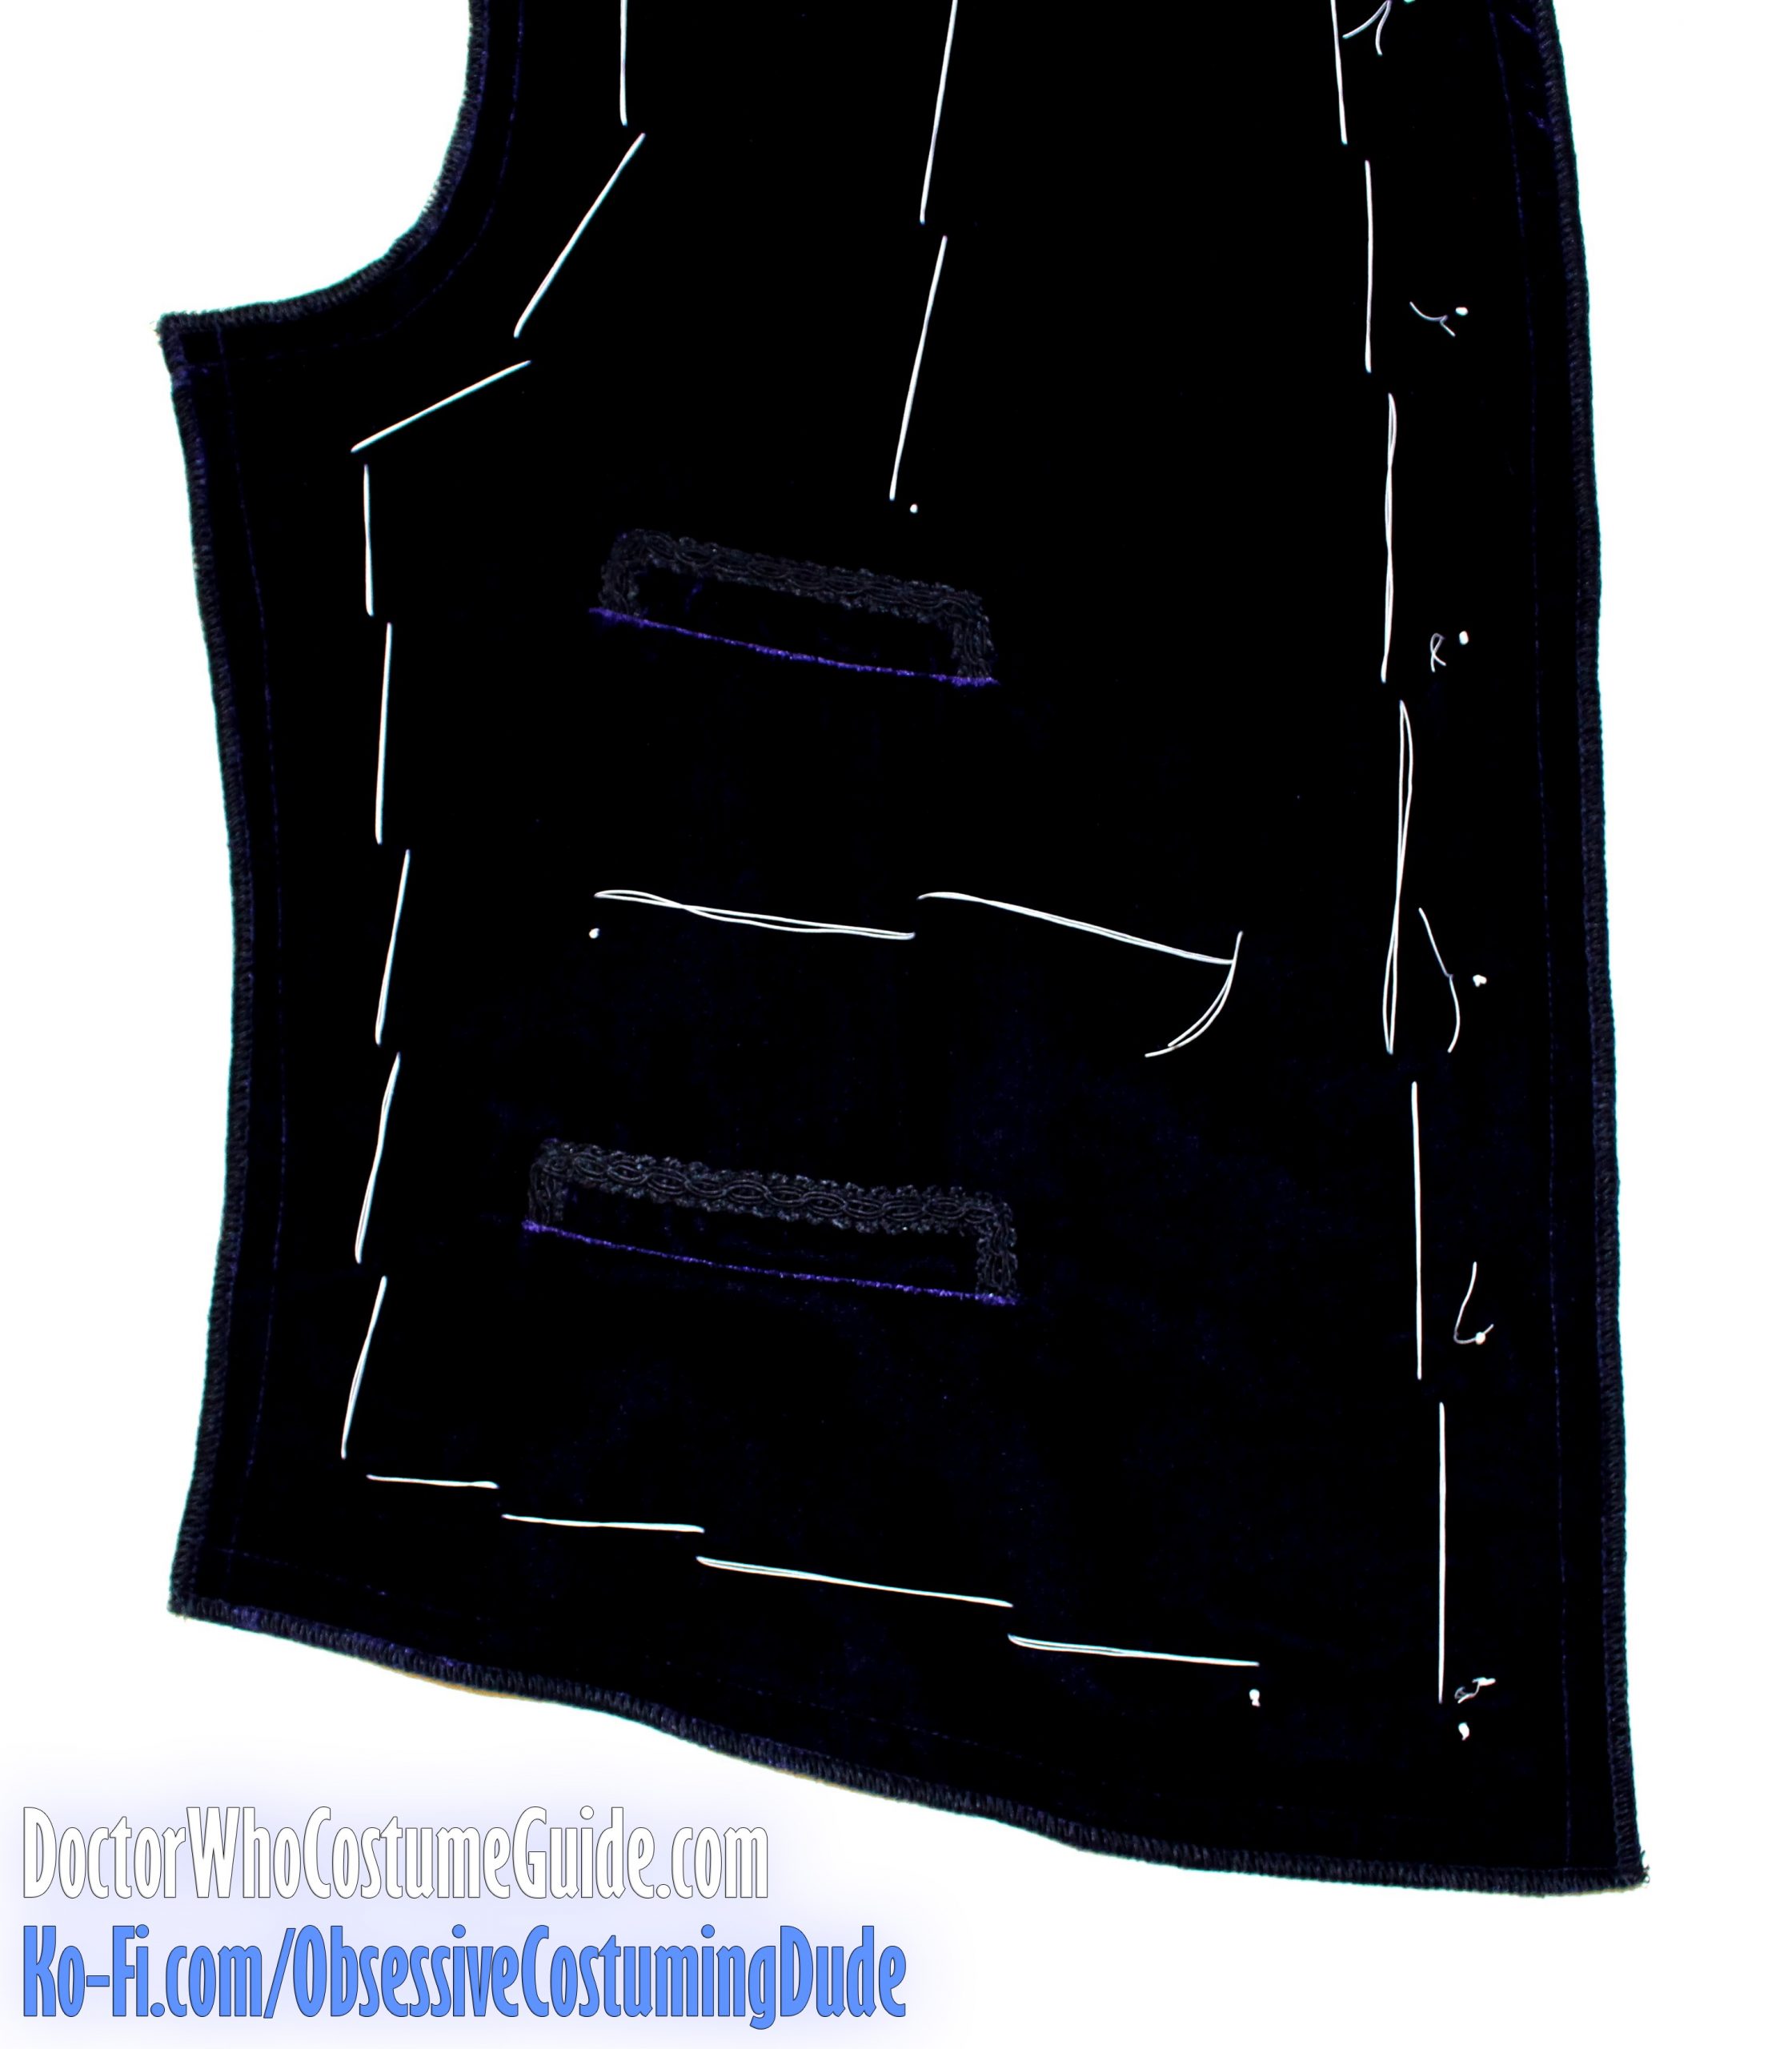 11th Doctor velvet waistcoat sewing tutorial - Doctor Who Costume Guide